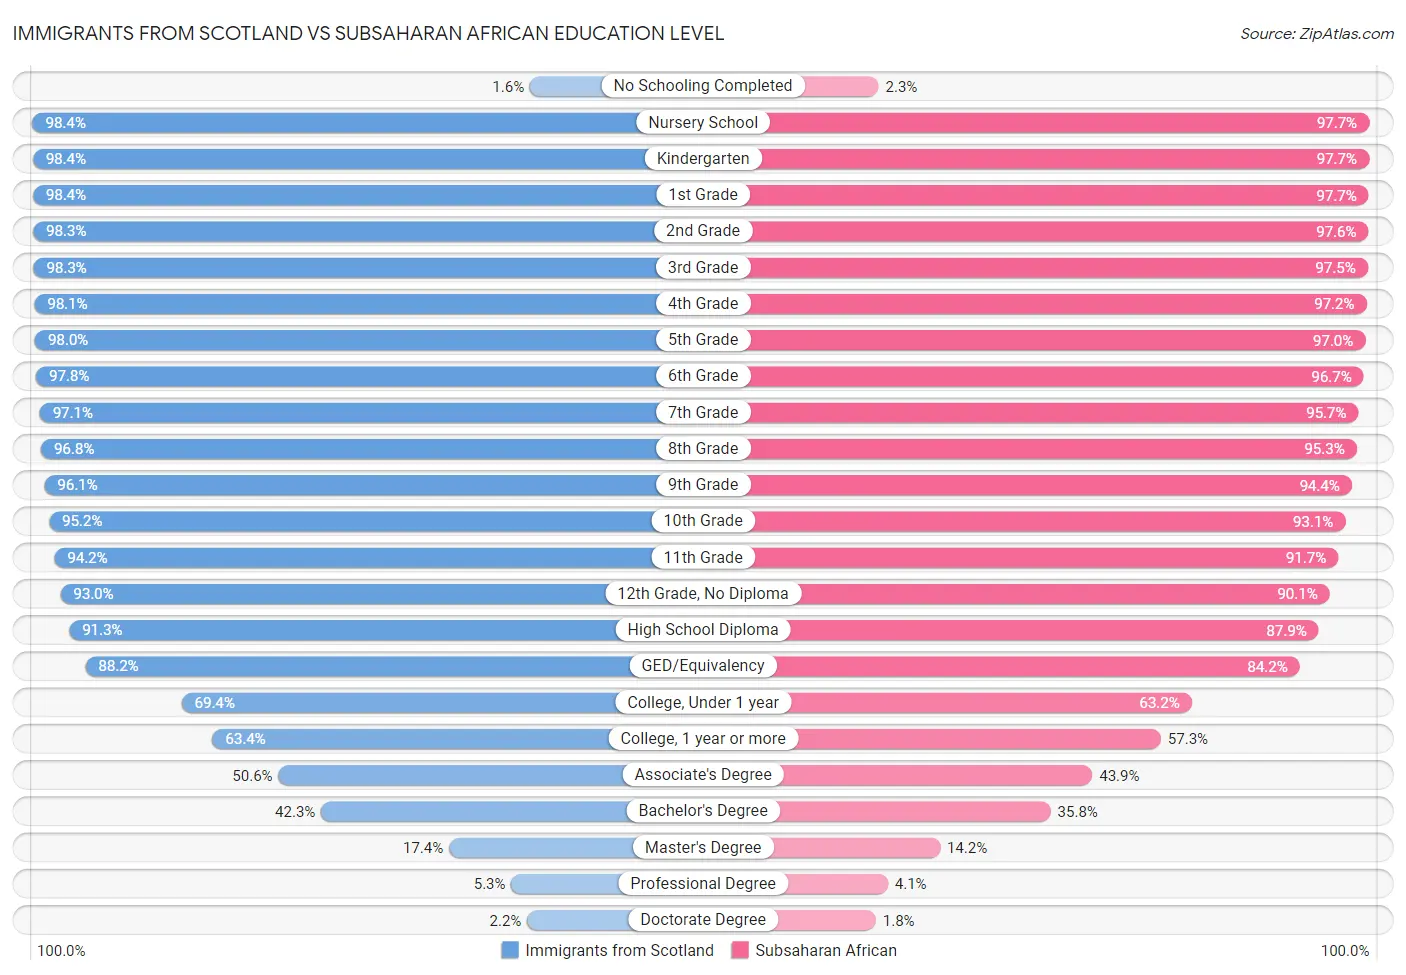 Immigrants from Scotland vs Subsaharan African Education Level